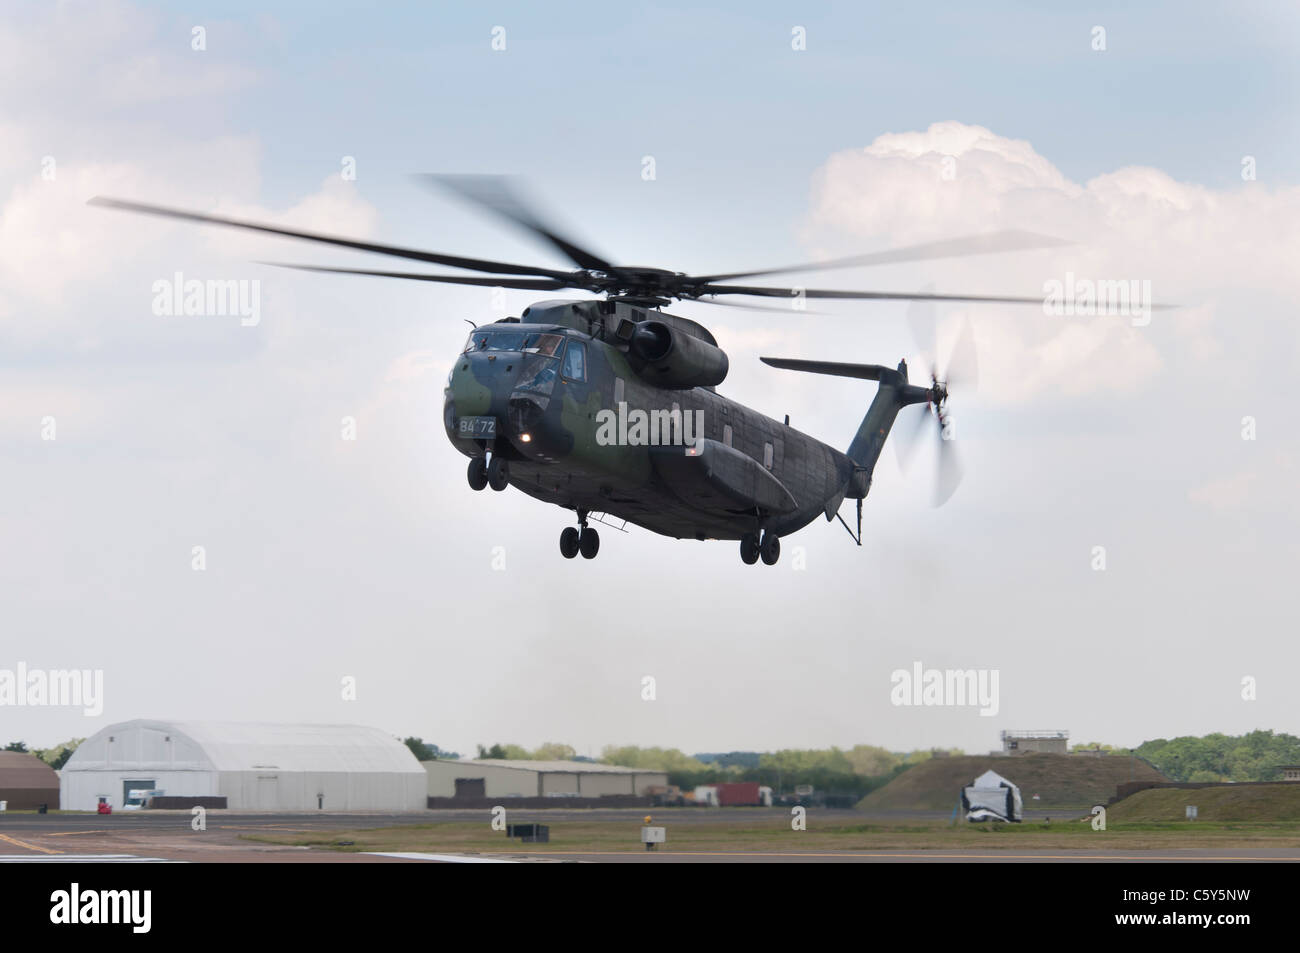 German Army Sikorsky CH-53G Heavy Lift Transport Helicopter Number 8472 arrives at Fairford for the International Air Tattoo Stock Photo